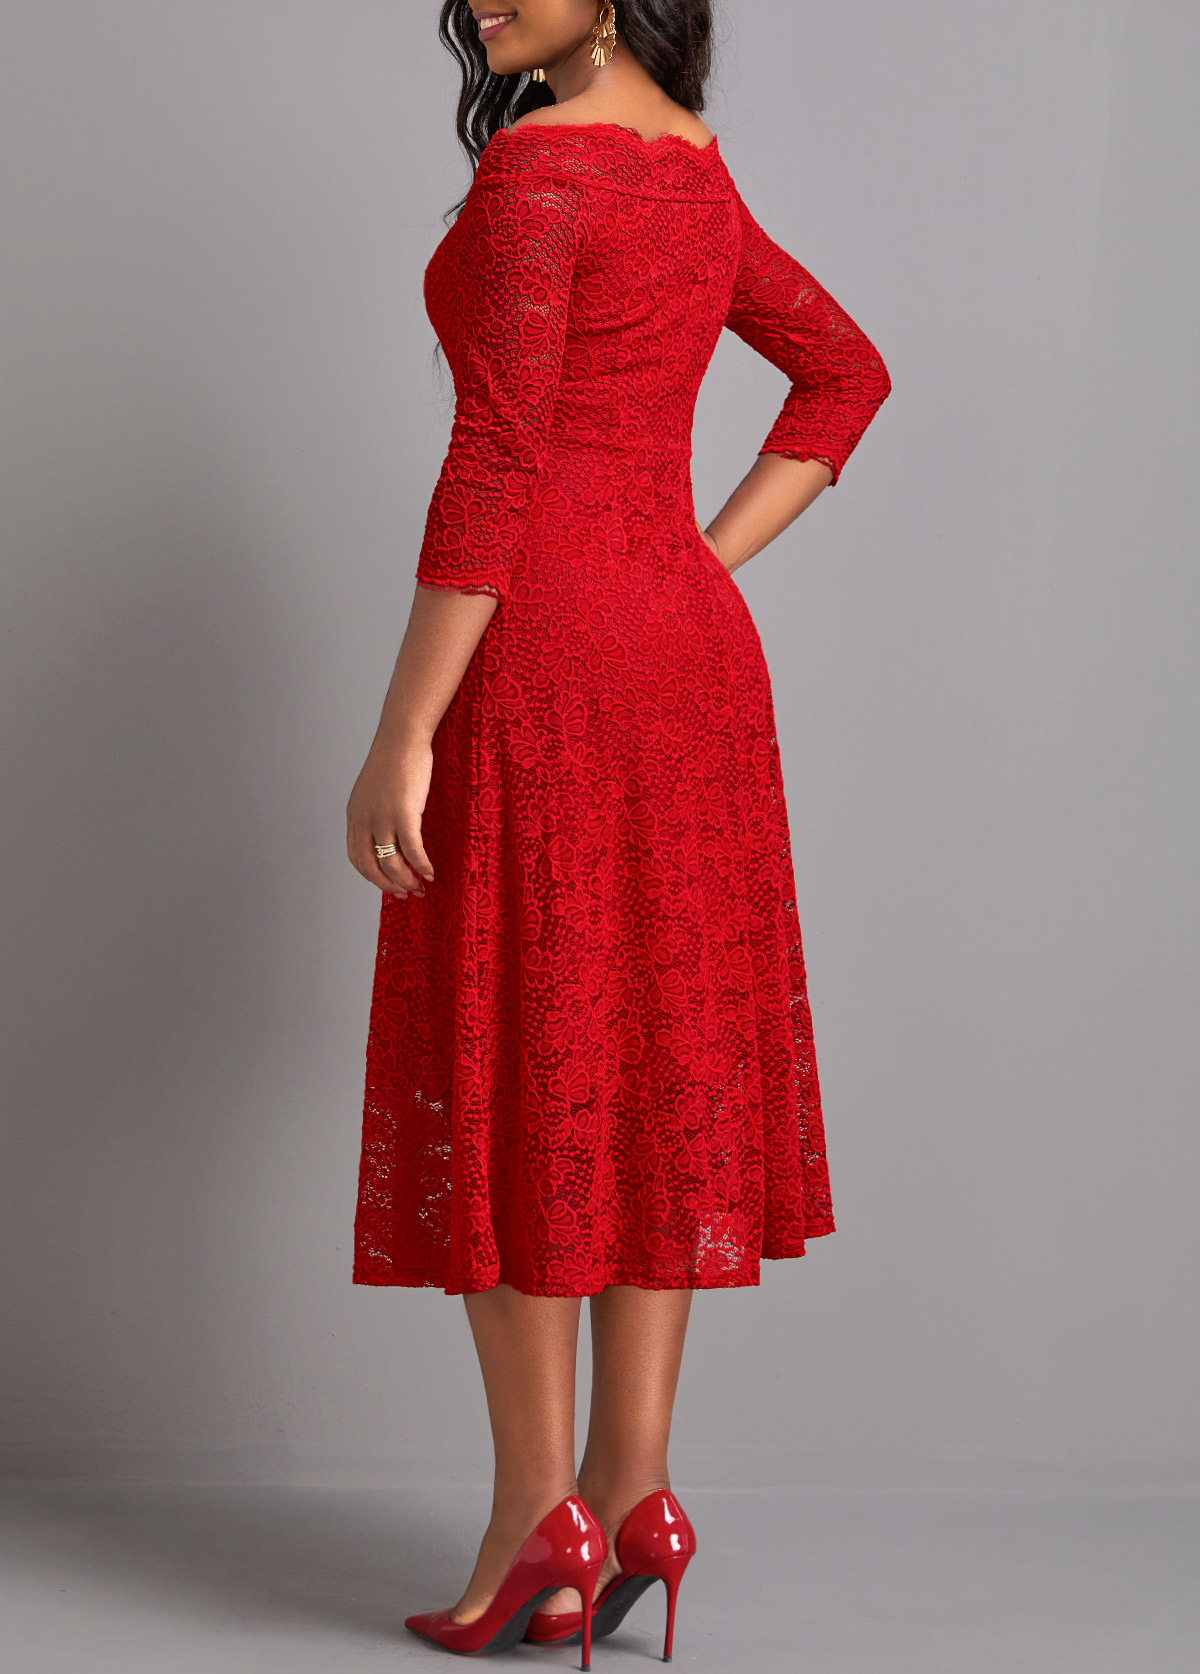 Red Lace Three Quarter Length Sleeve Dress